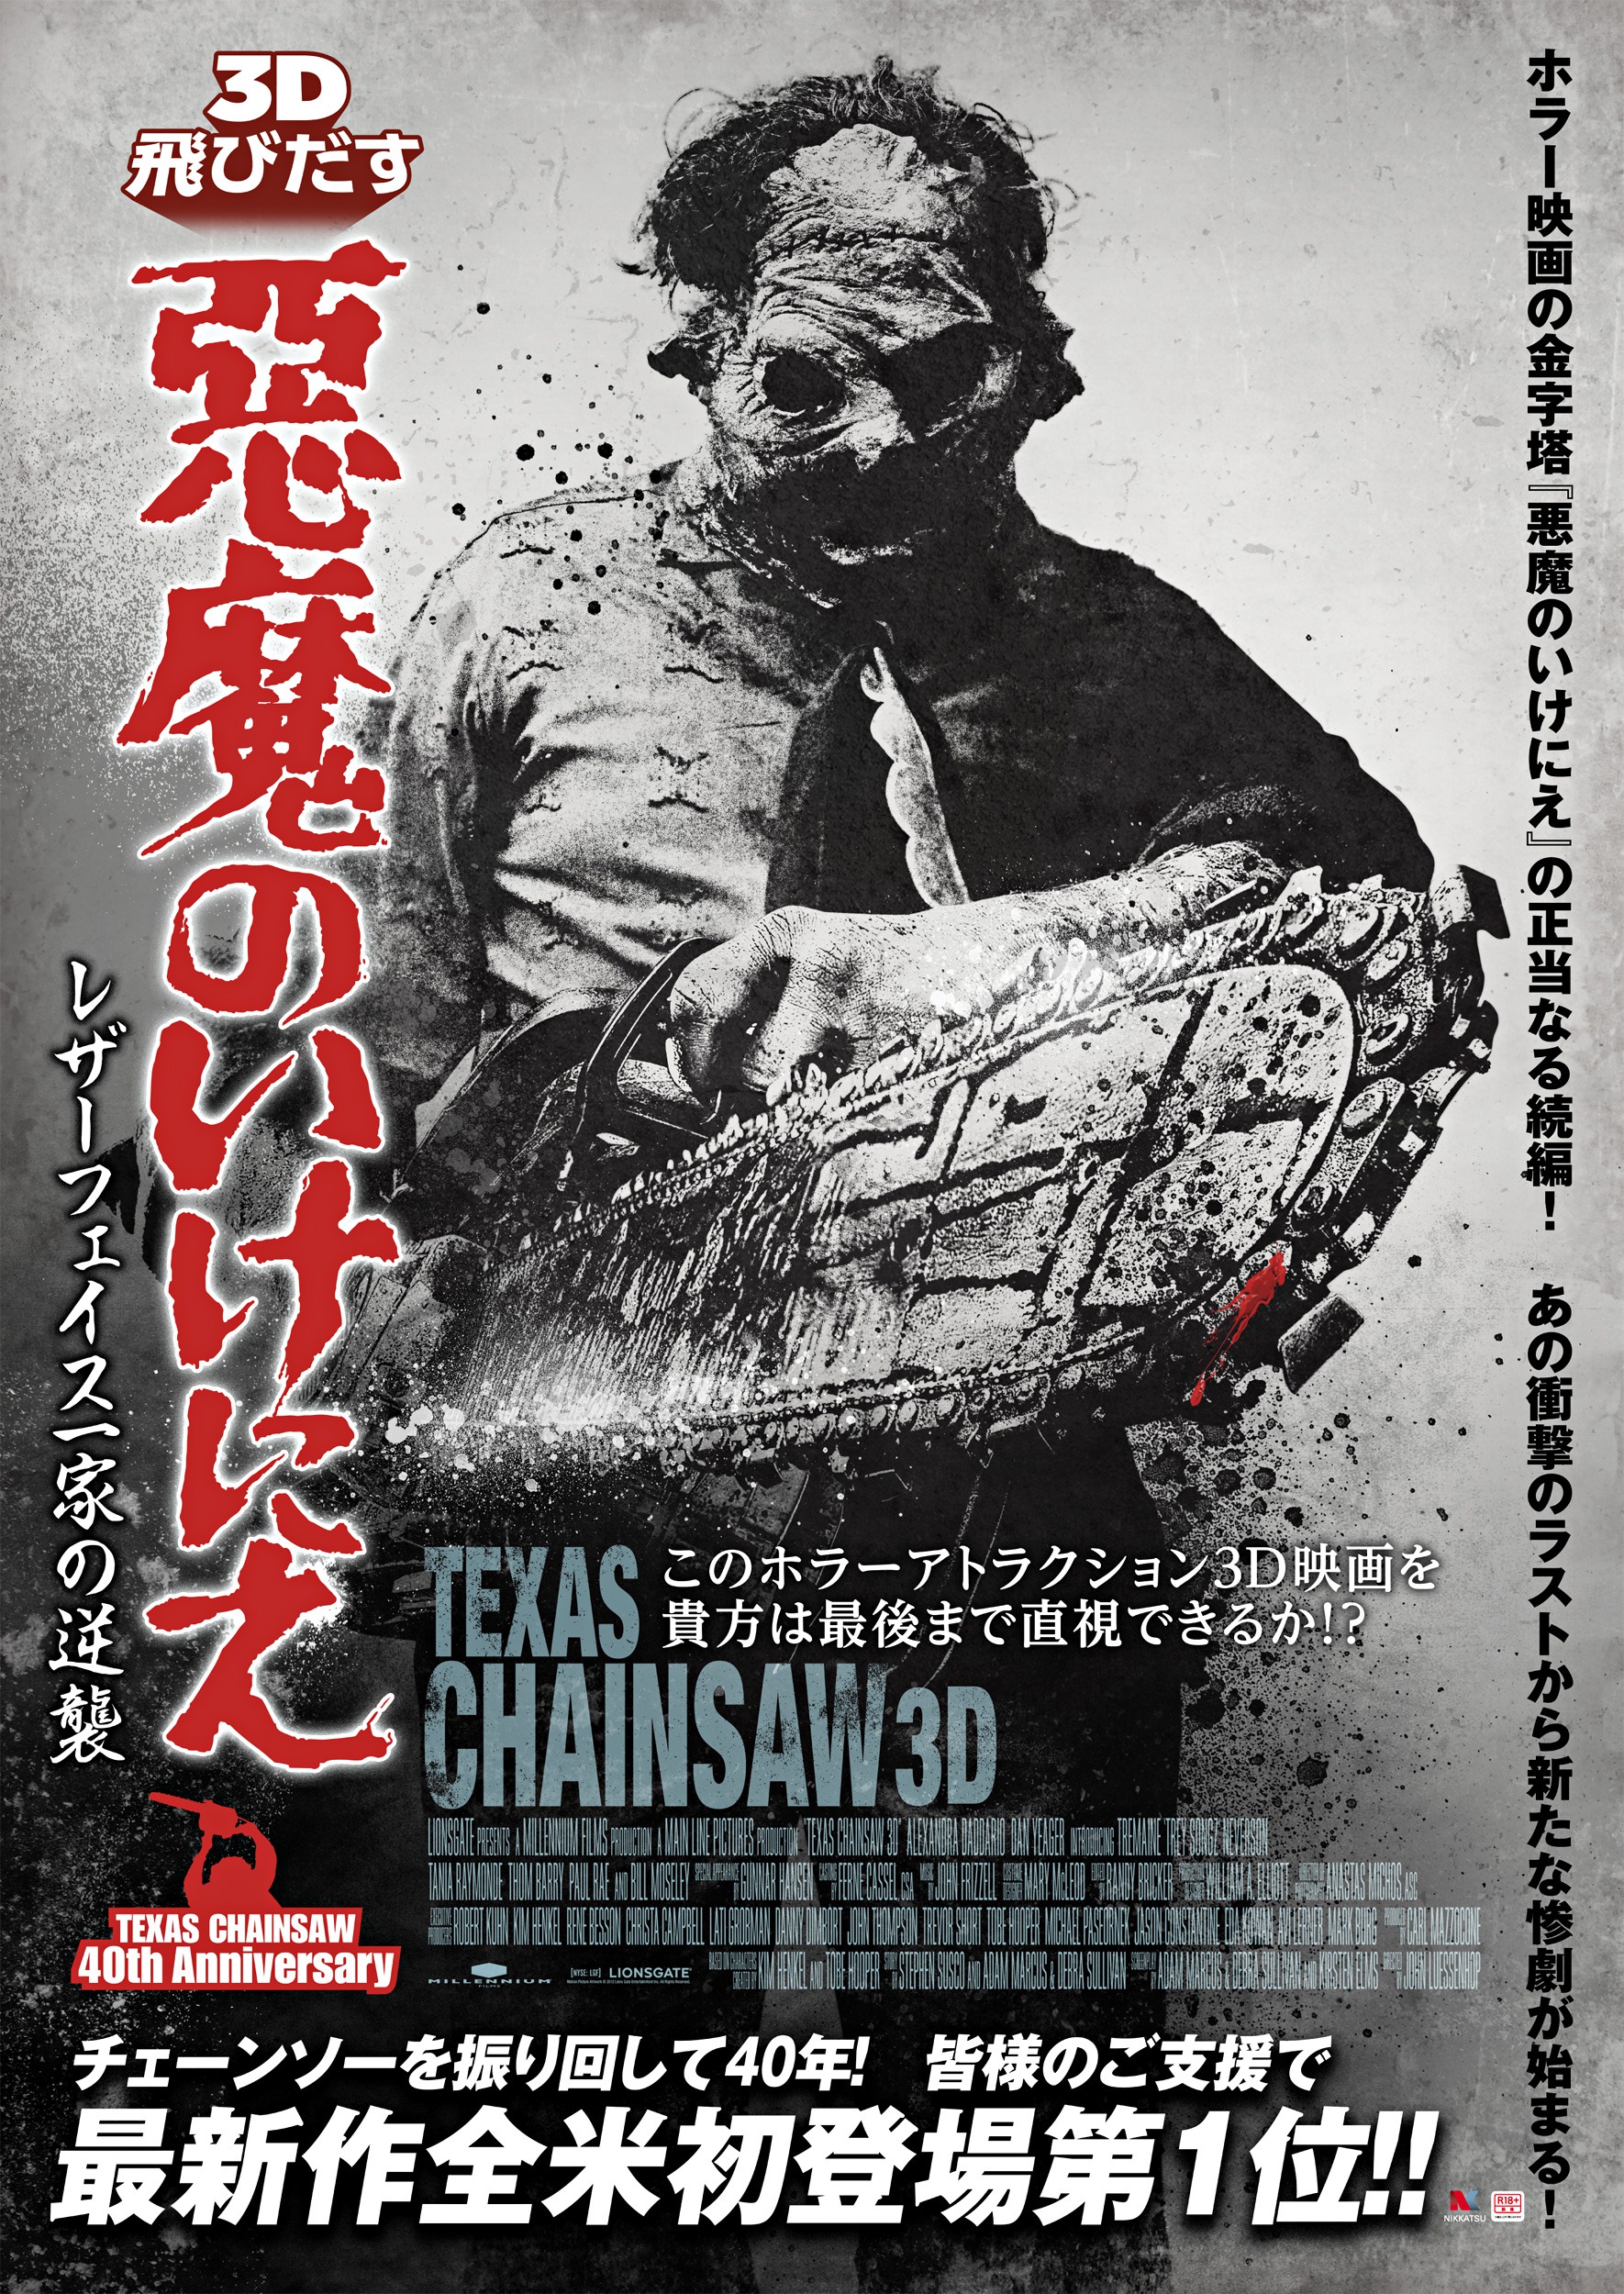 Mega Sized Movie Poster Image for Texas Chainsaw 3D (#5 of 5)